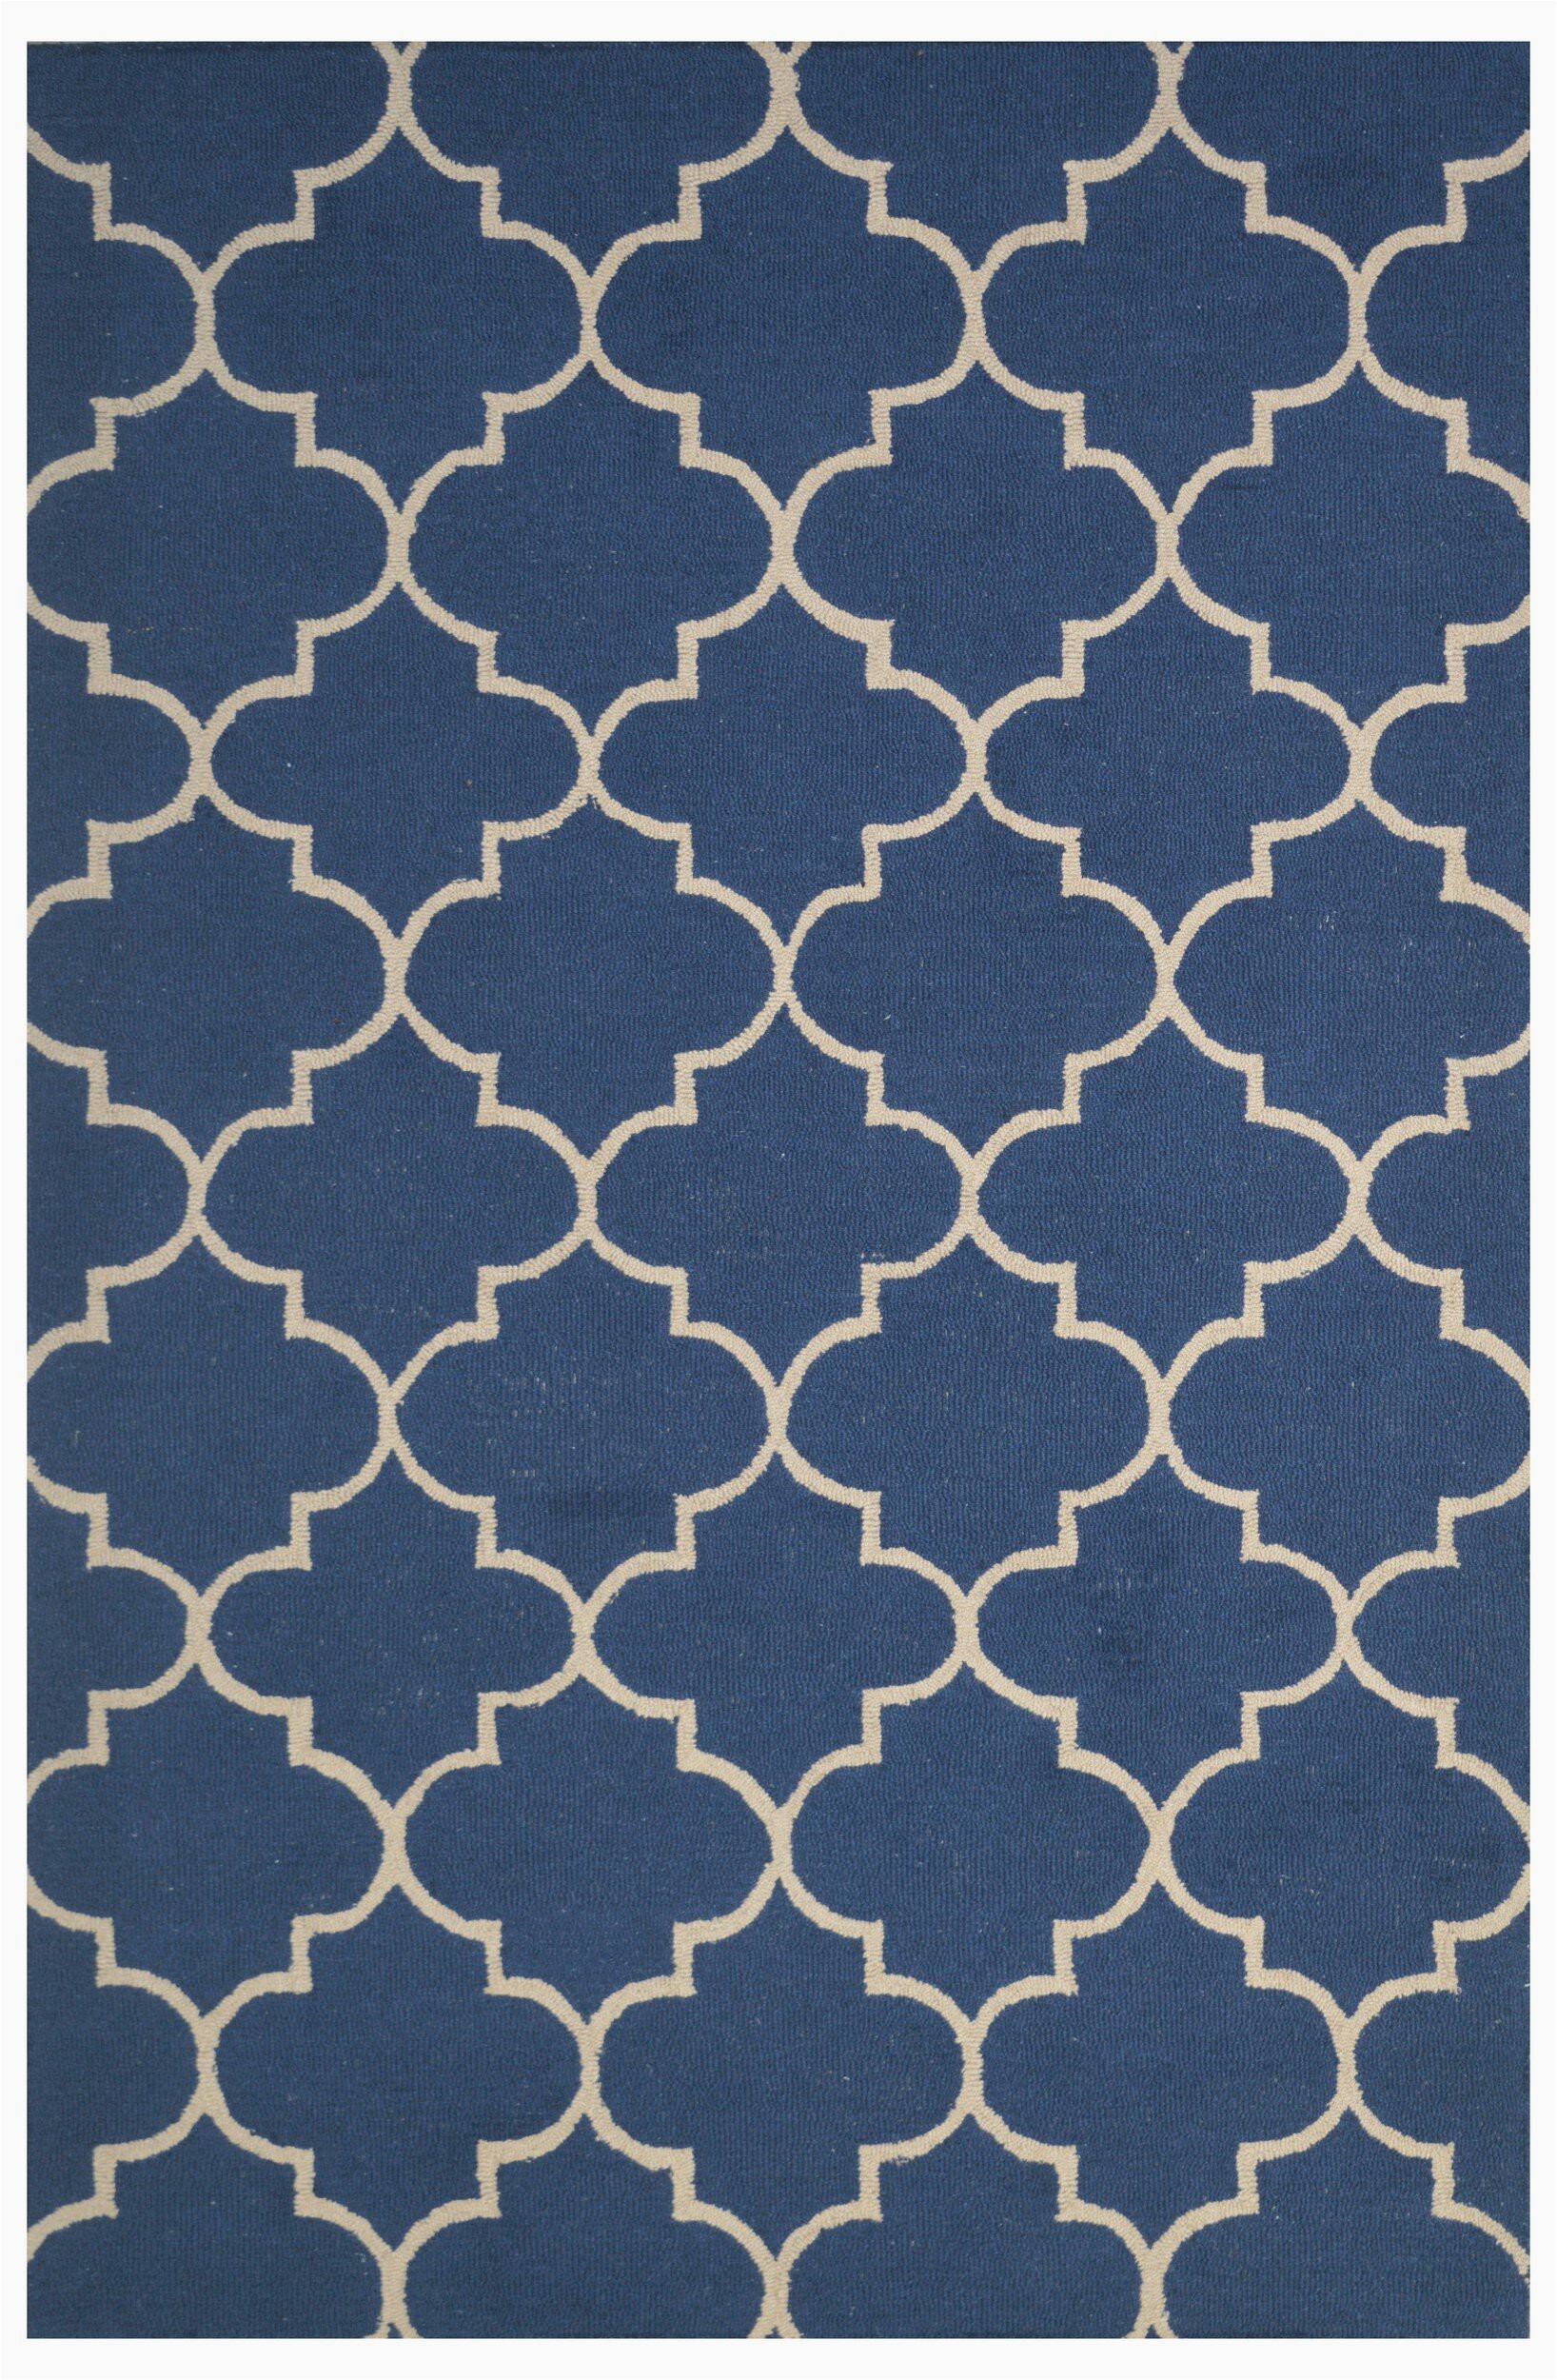 Navy Blue and Teal area Rugs Wool Hand Tufted Navy Blue area Rug